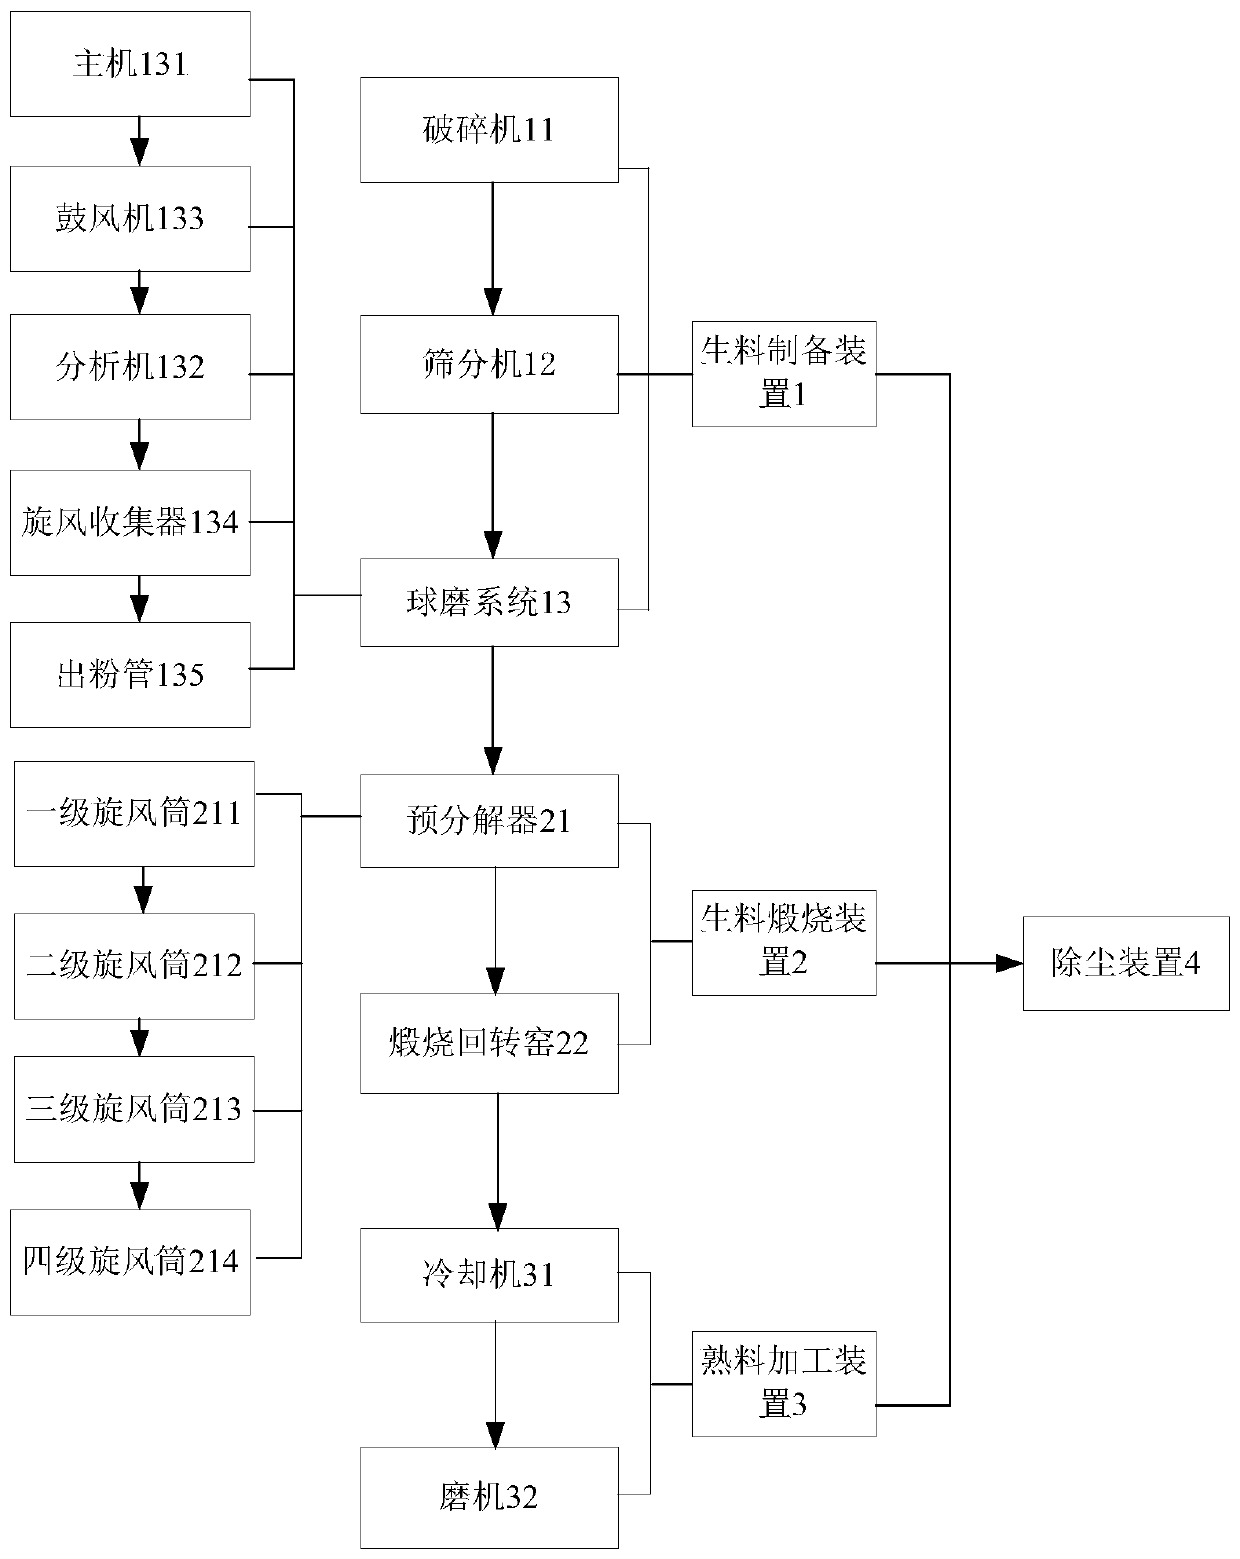 Technology and production system for producing aluminum acid calcium powder by using aluminum ash